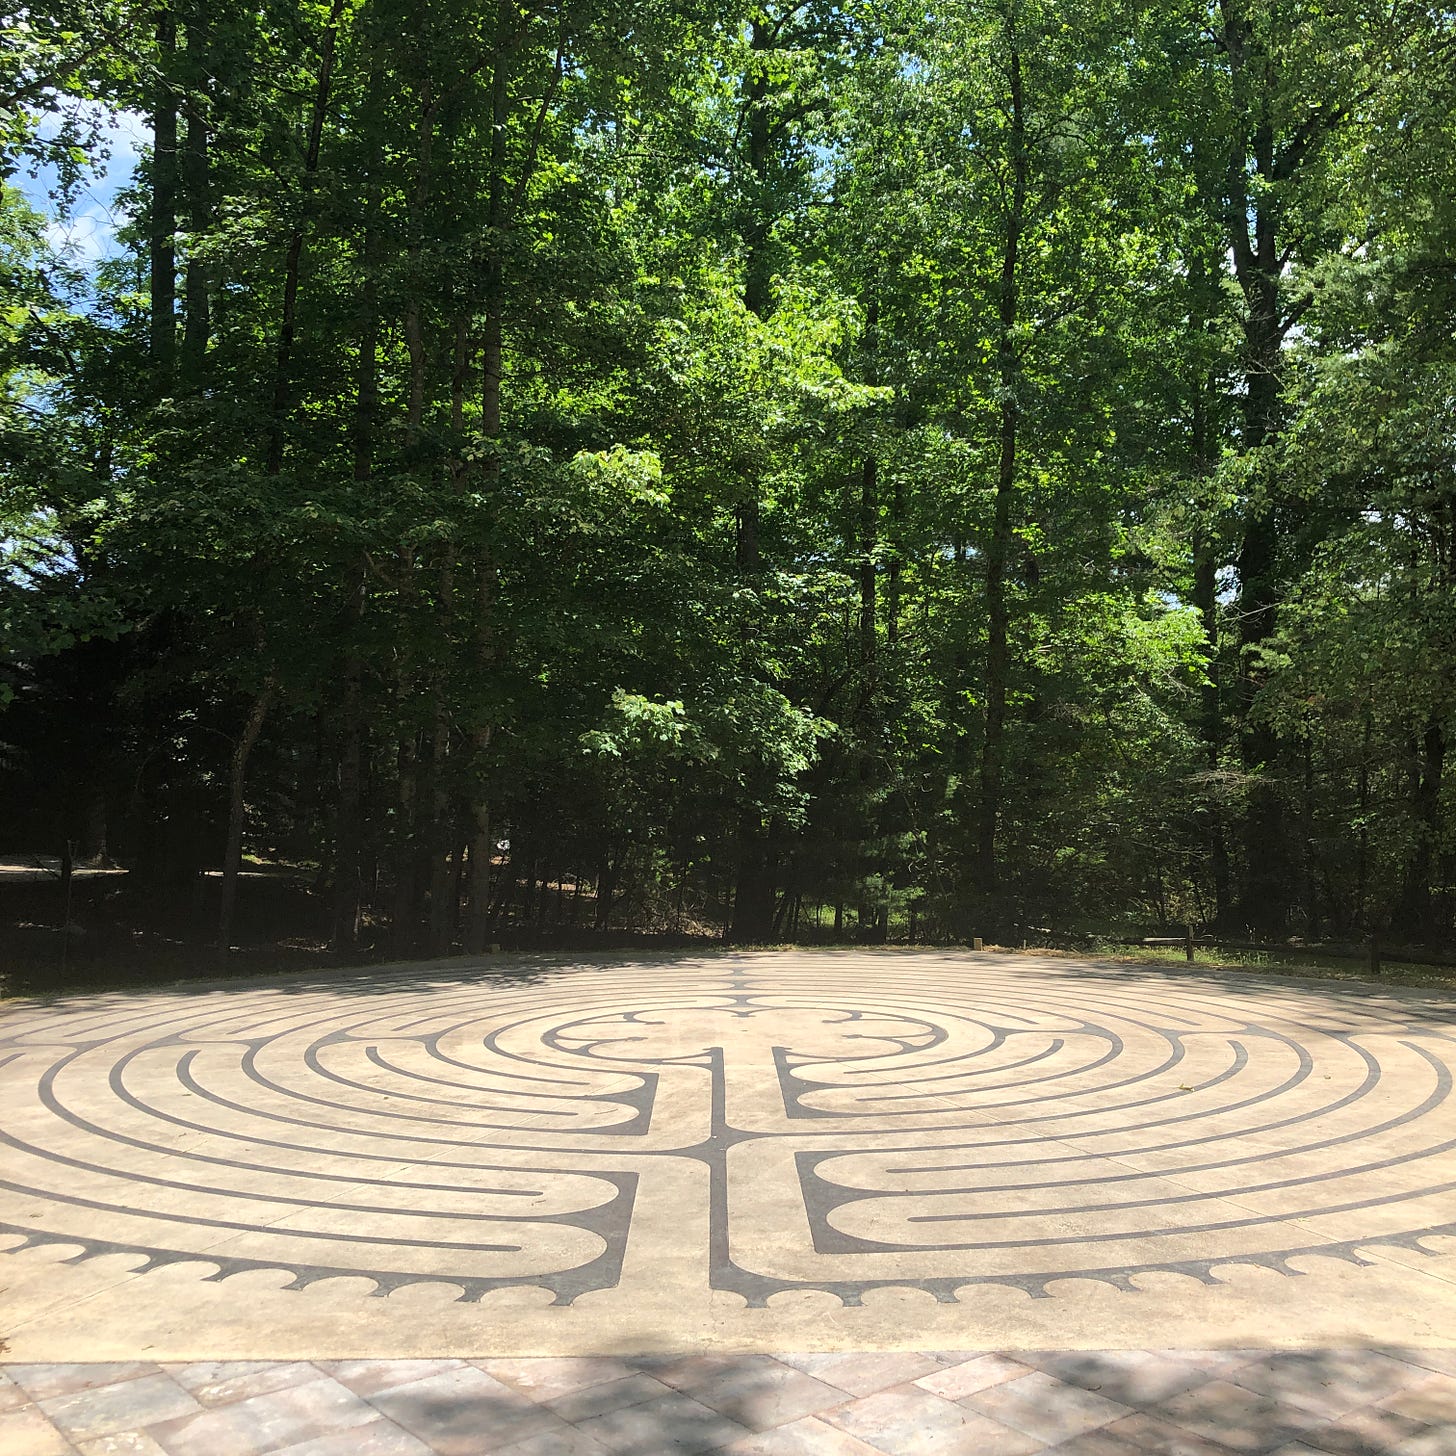 A labyrinth pattern on the ground with trees in the background